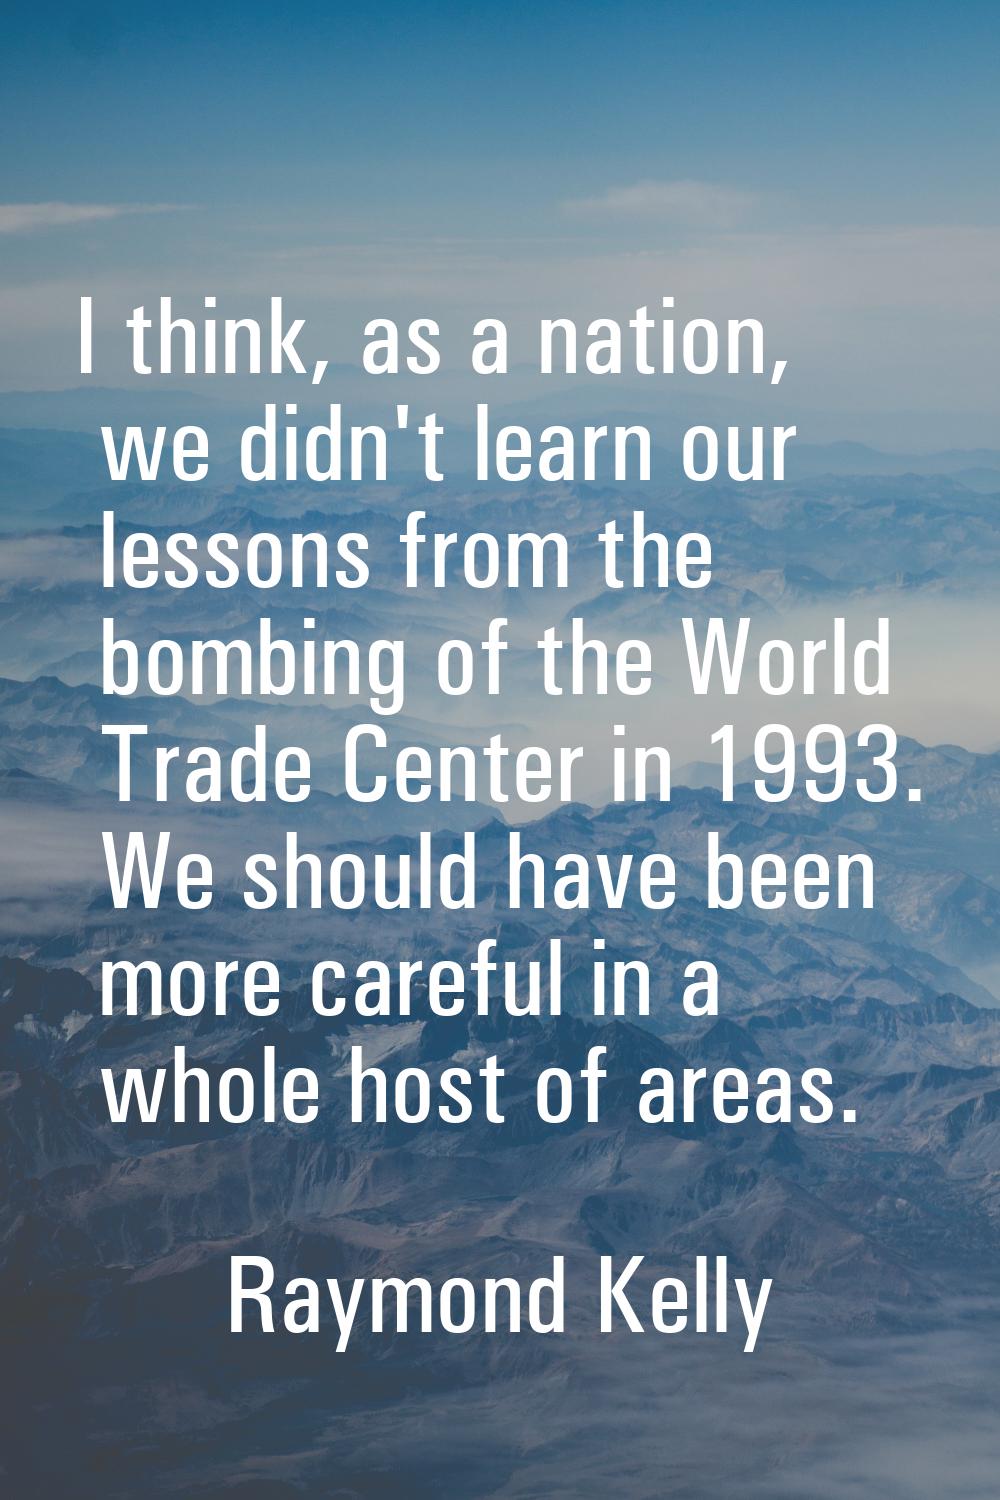 I think, as a nation, we didn't learn our lessons from the bombing of the World Trade Center in 199